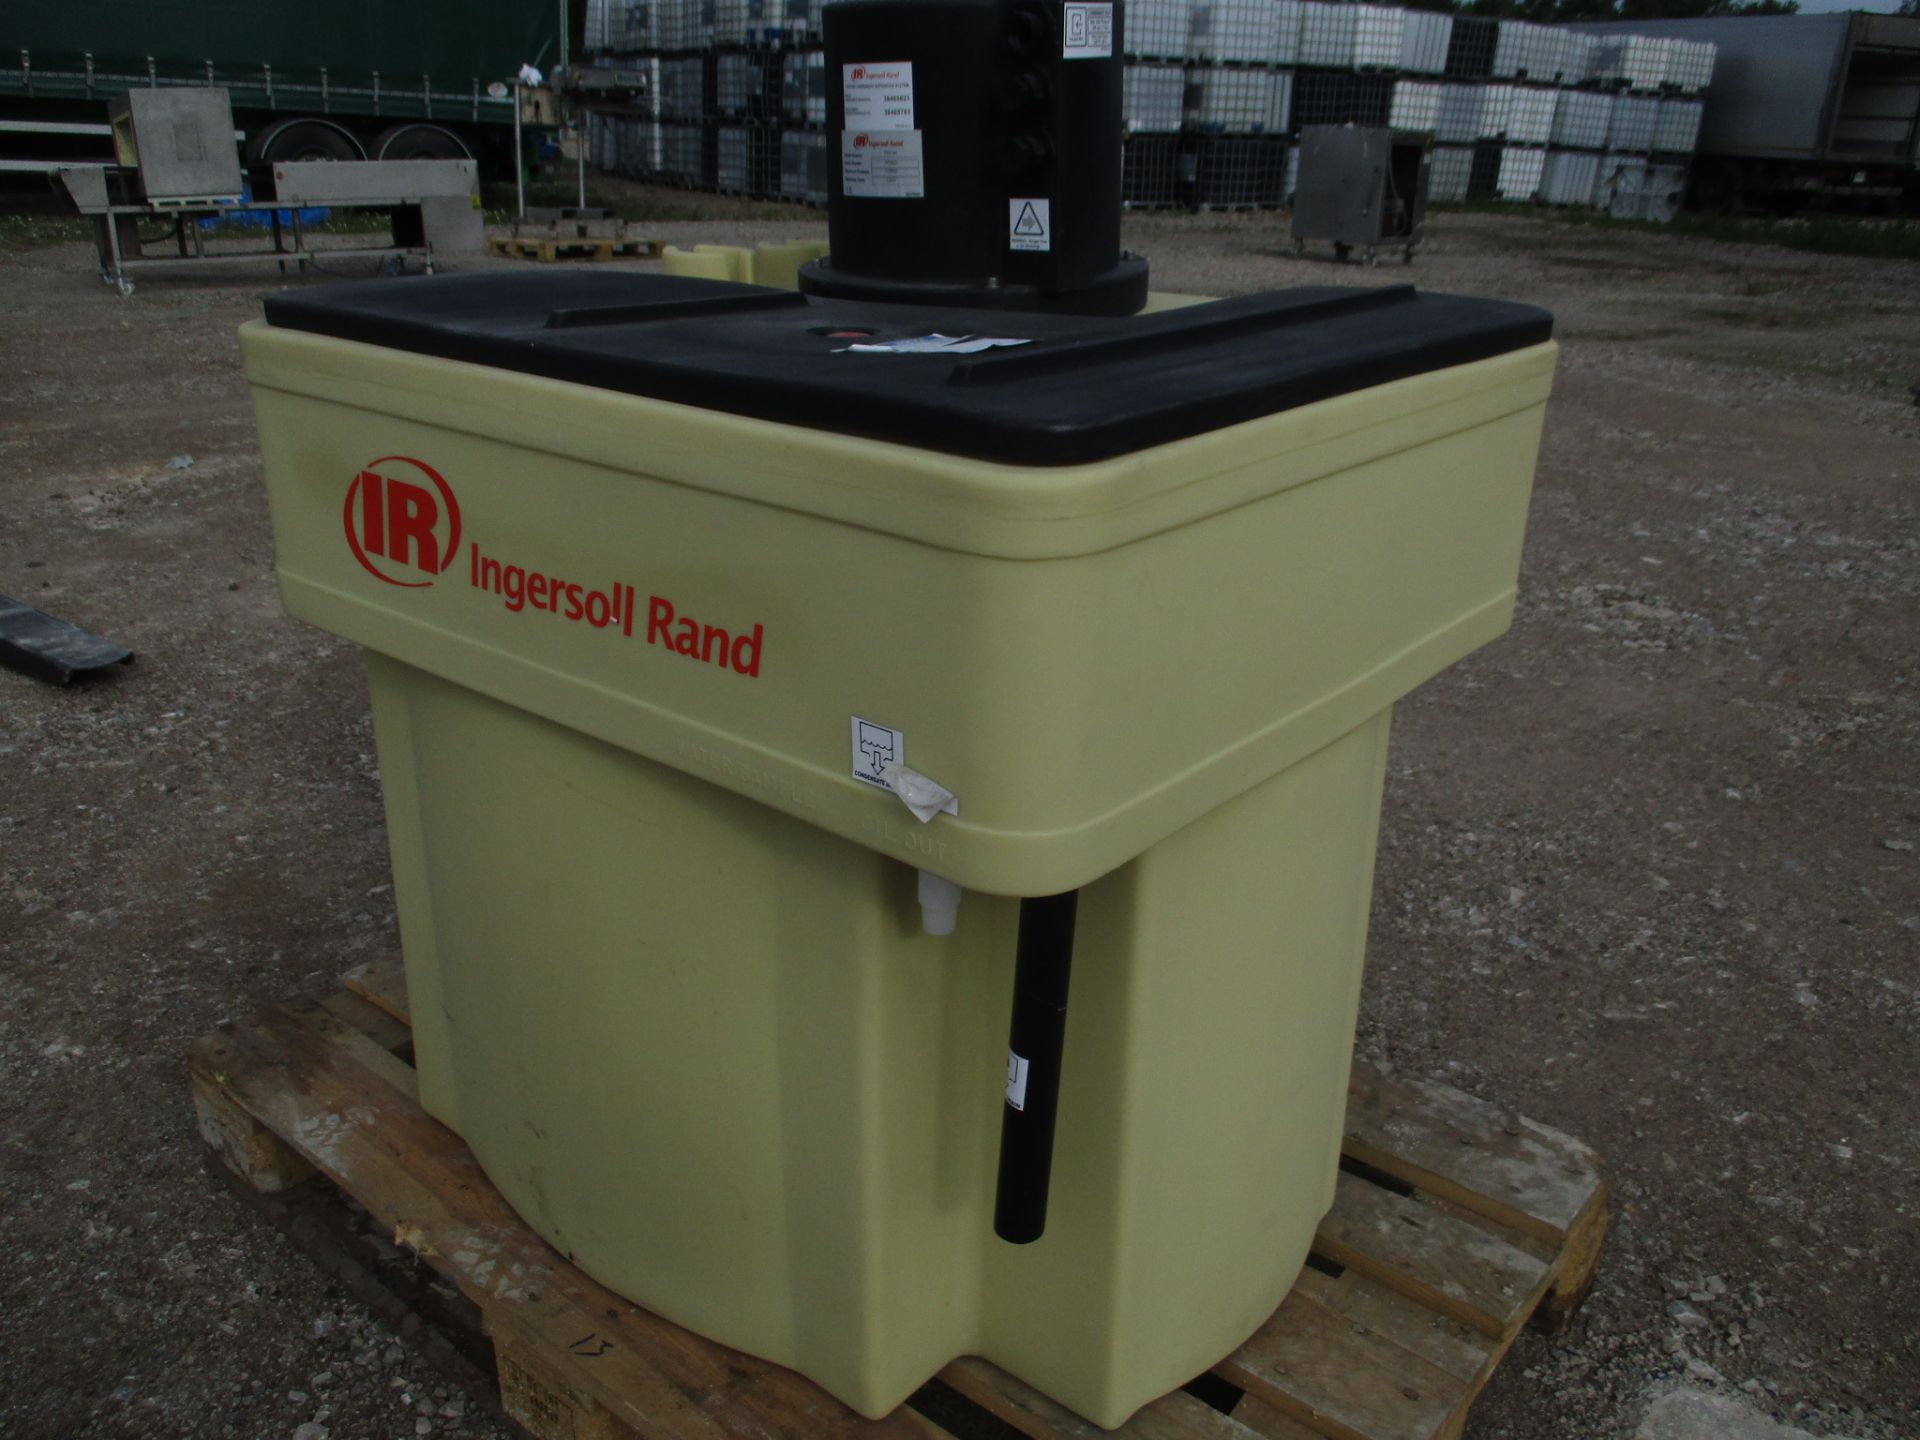 Ingersoll Rand PSG-60 Polysep Condensate Separation System, serial no. 002065, approx. 107cm x - Image 4 of 4